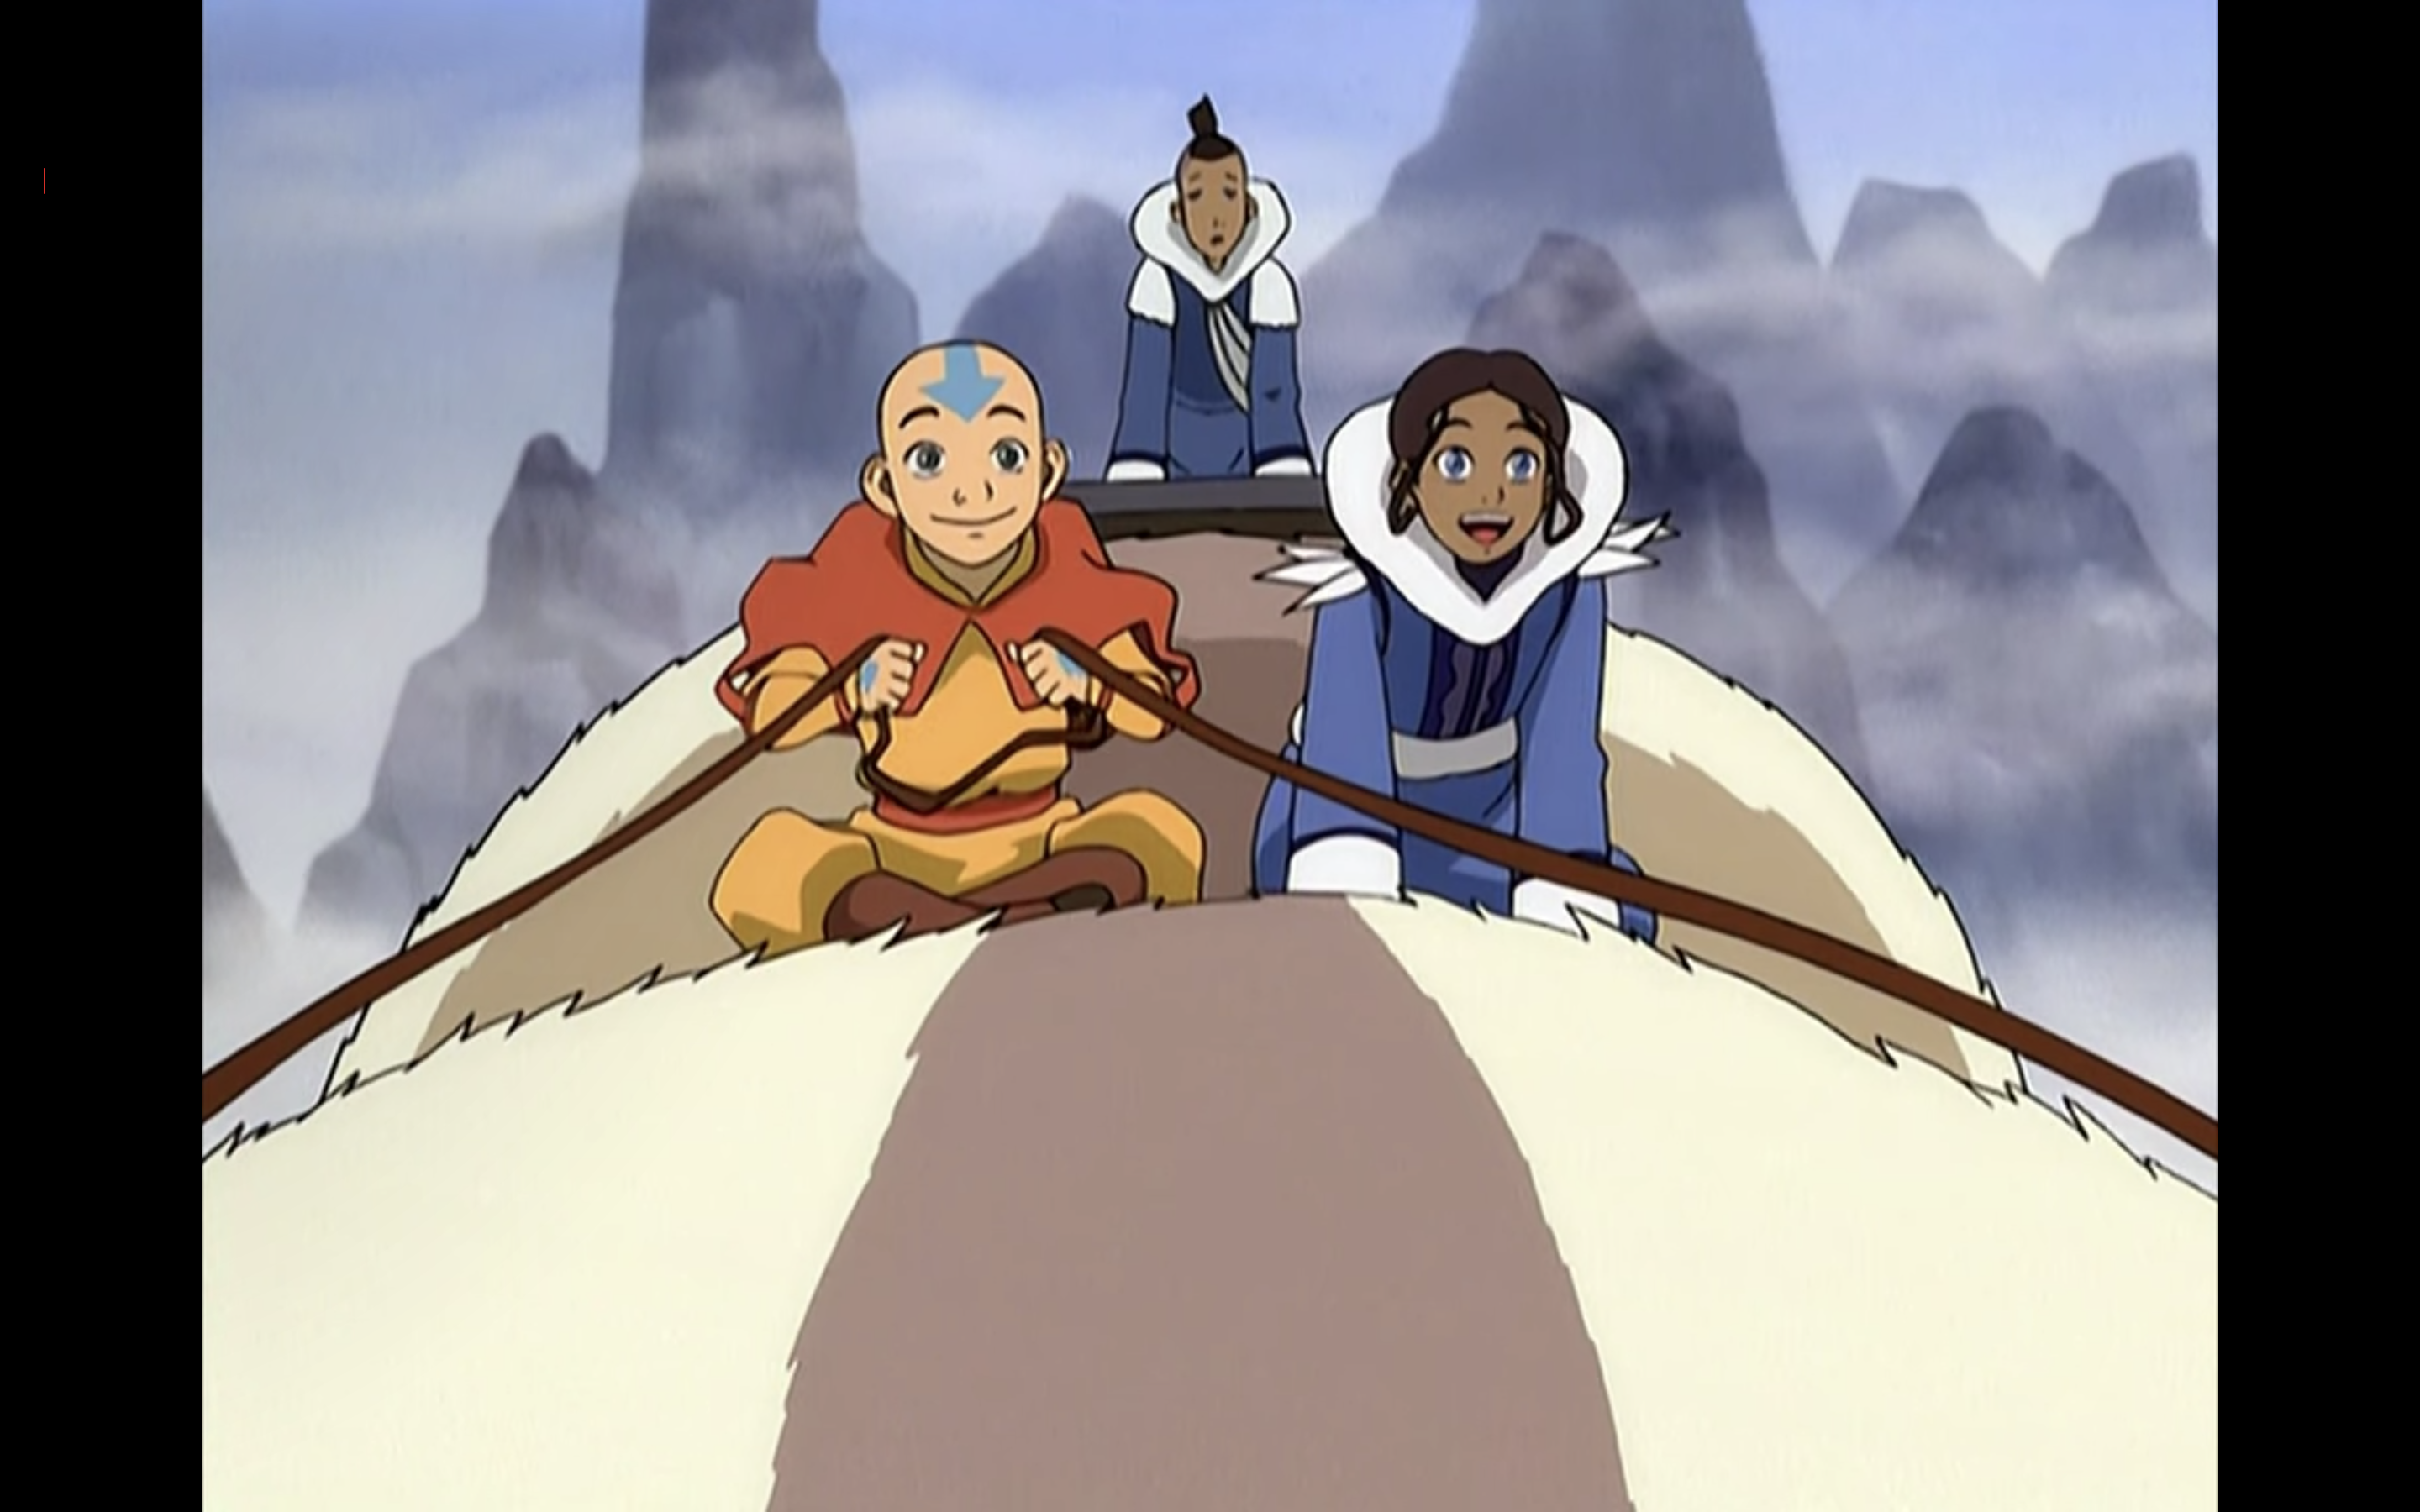 How Avatar The Last Airbender Changed Animation for the Better